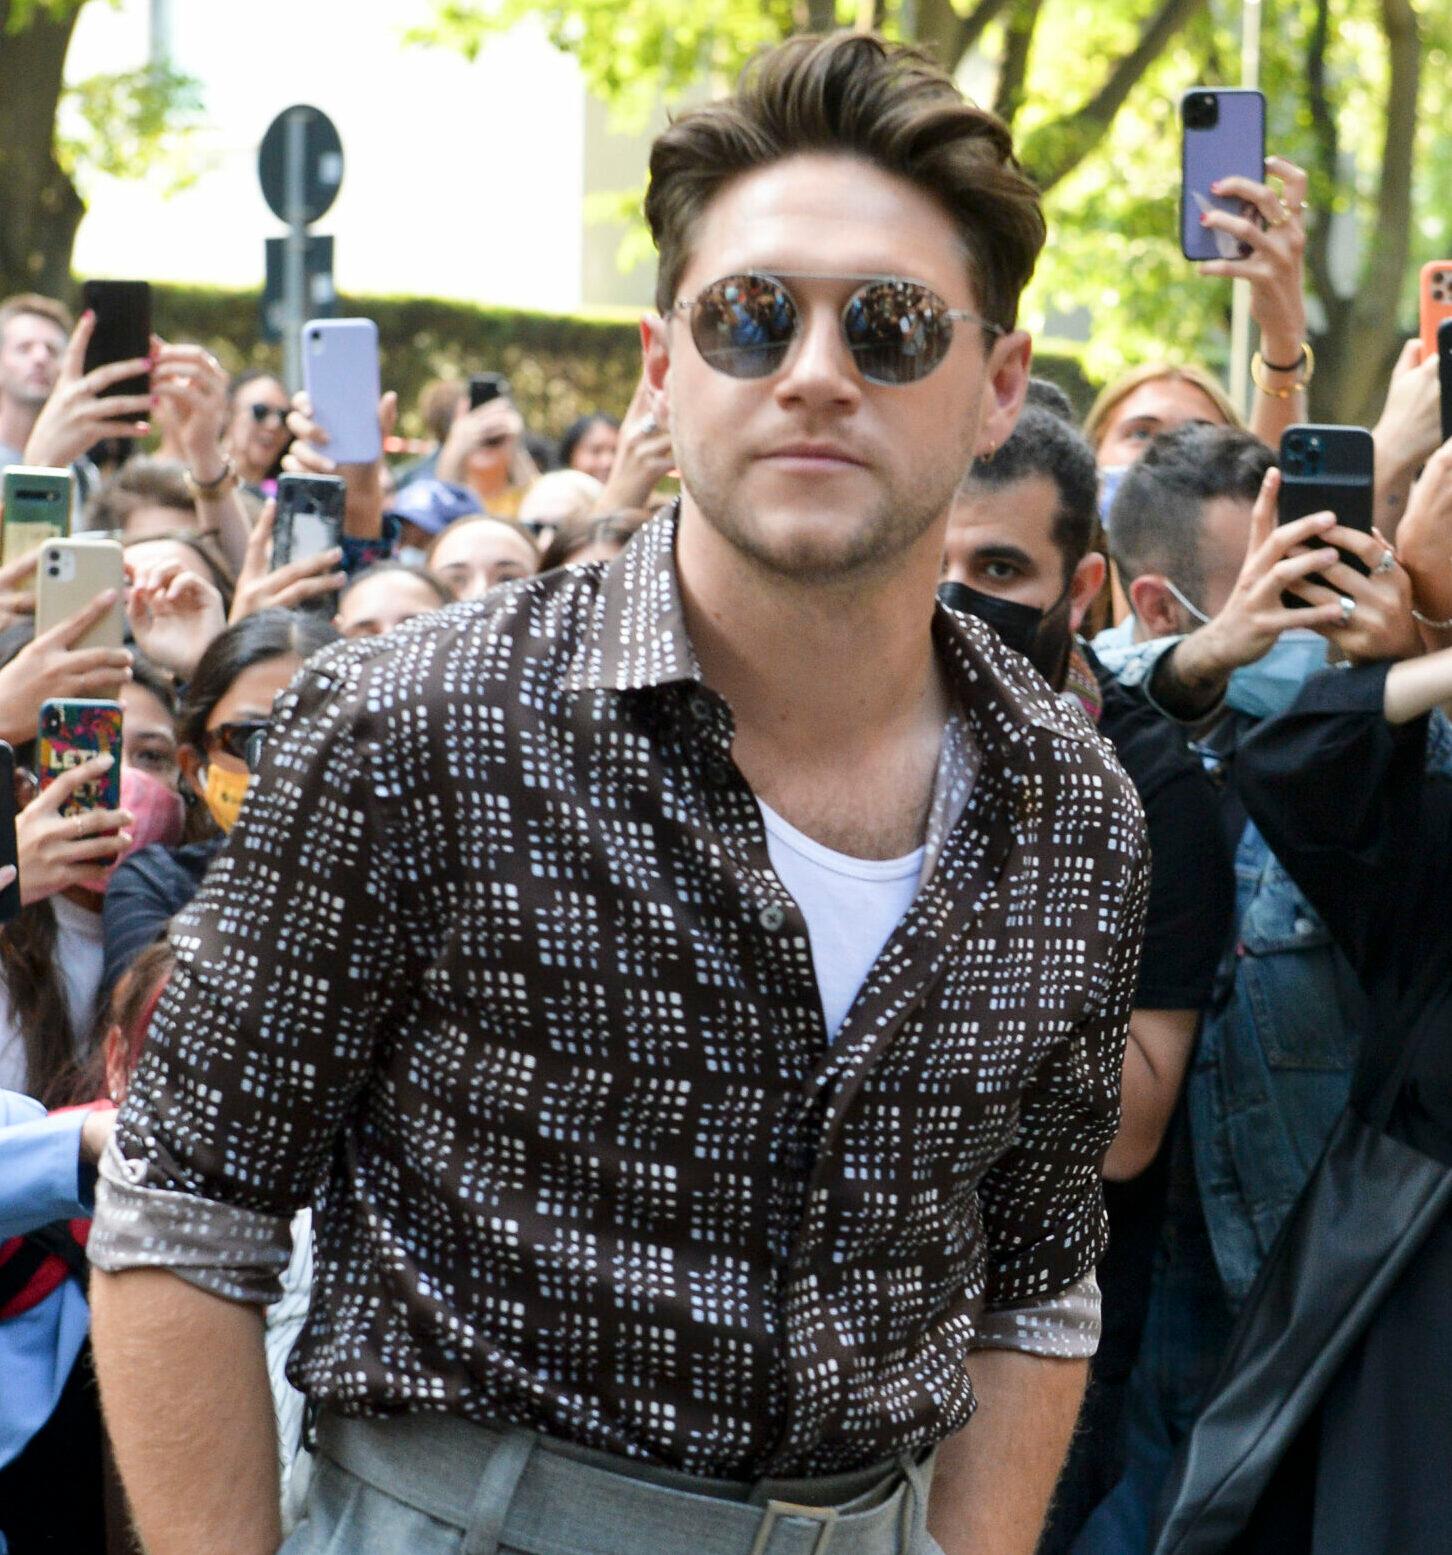 Niall Horan is seen at Armani Fashion Show Event during the Milan Fashion Week